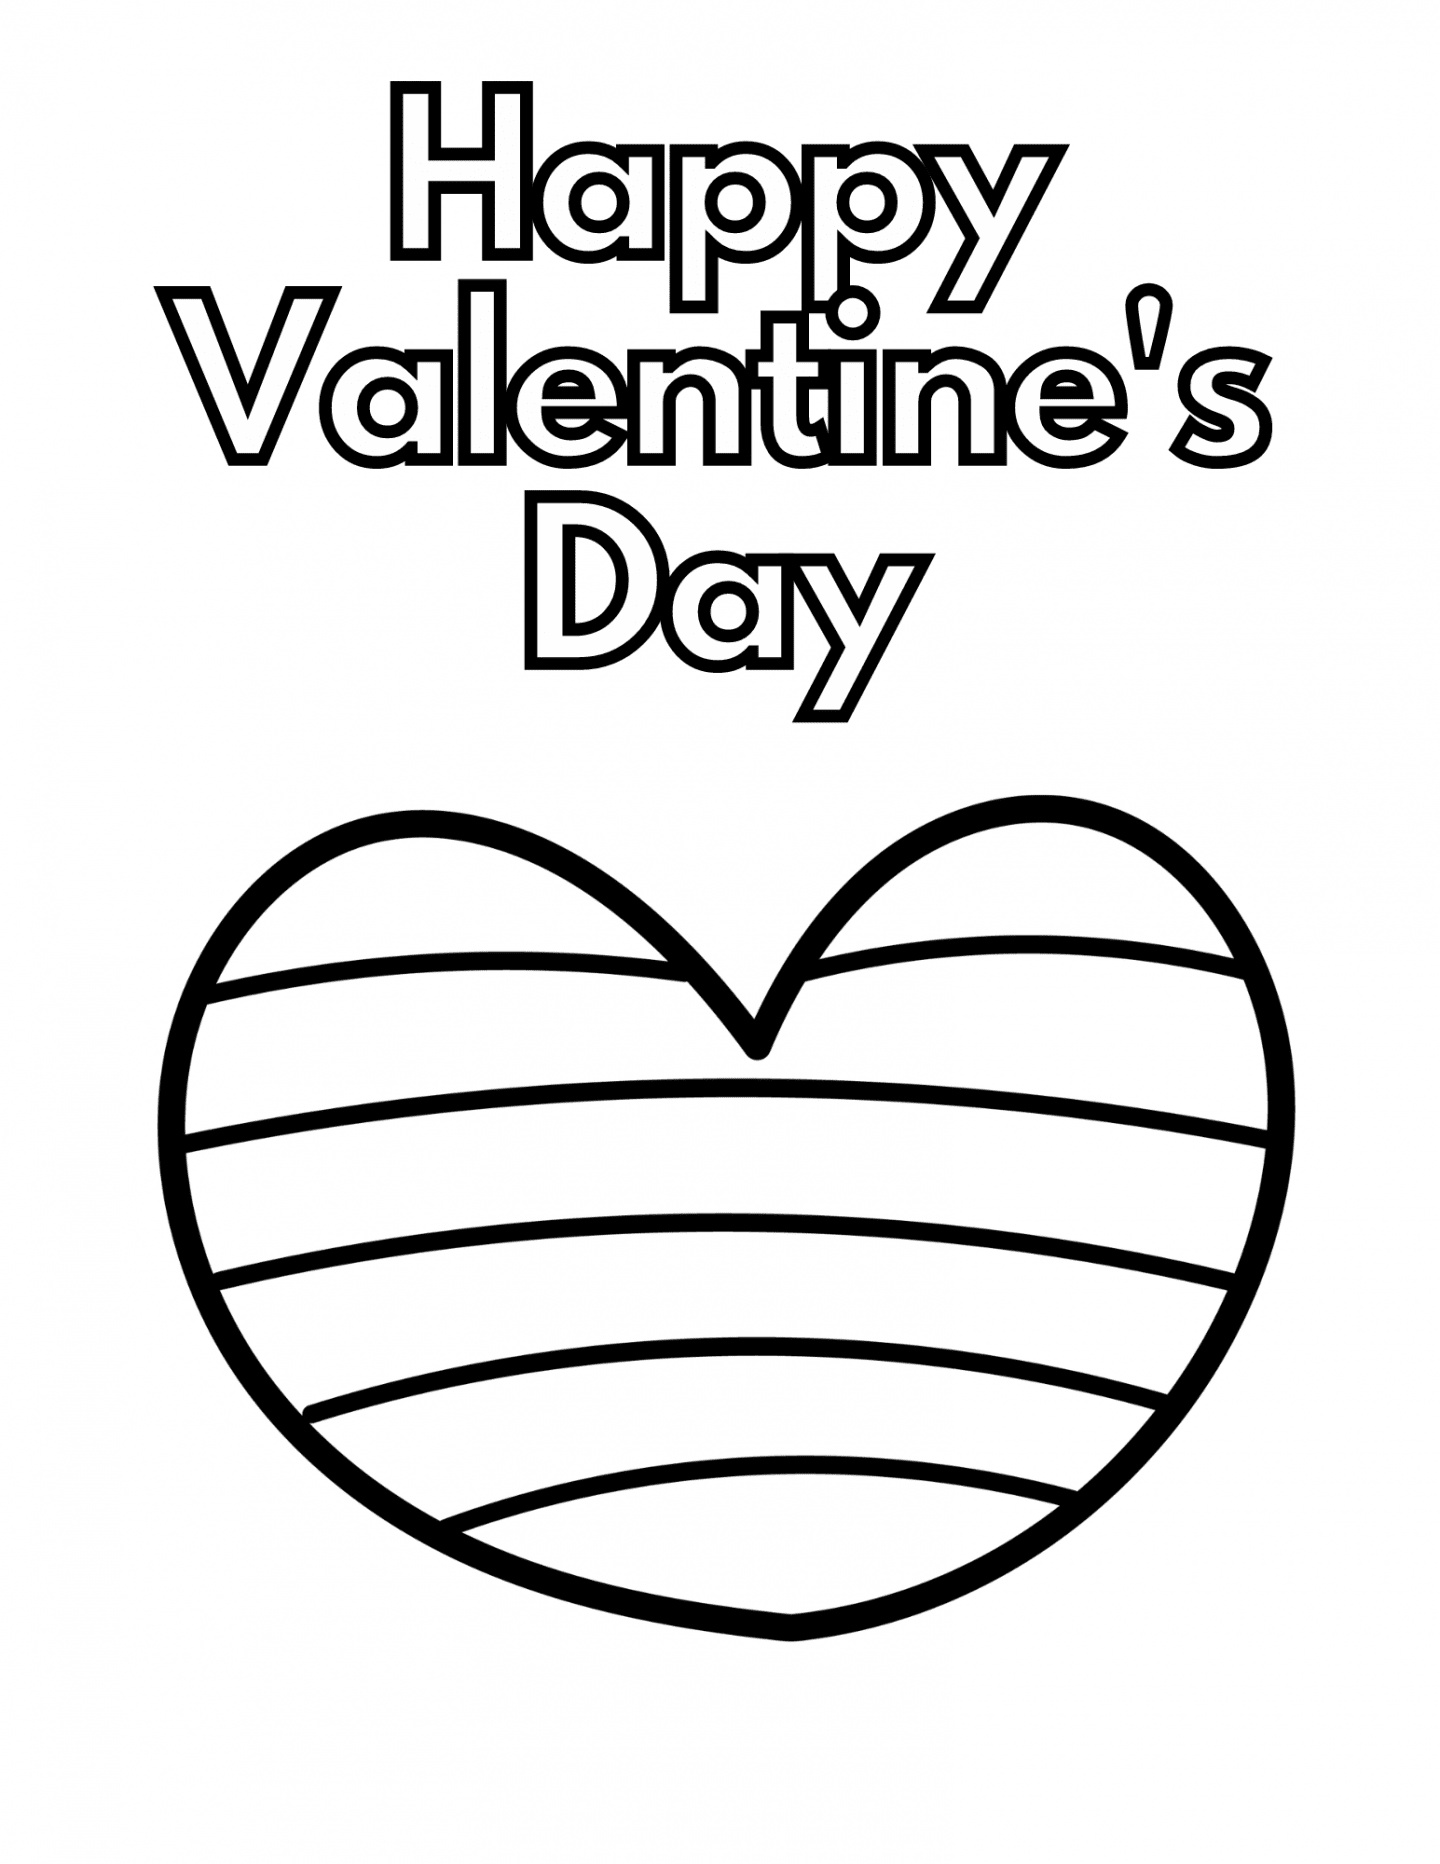 Printable valentines coloring pages